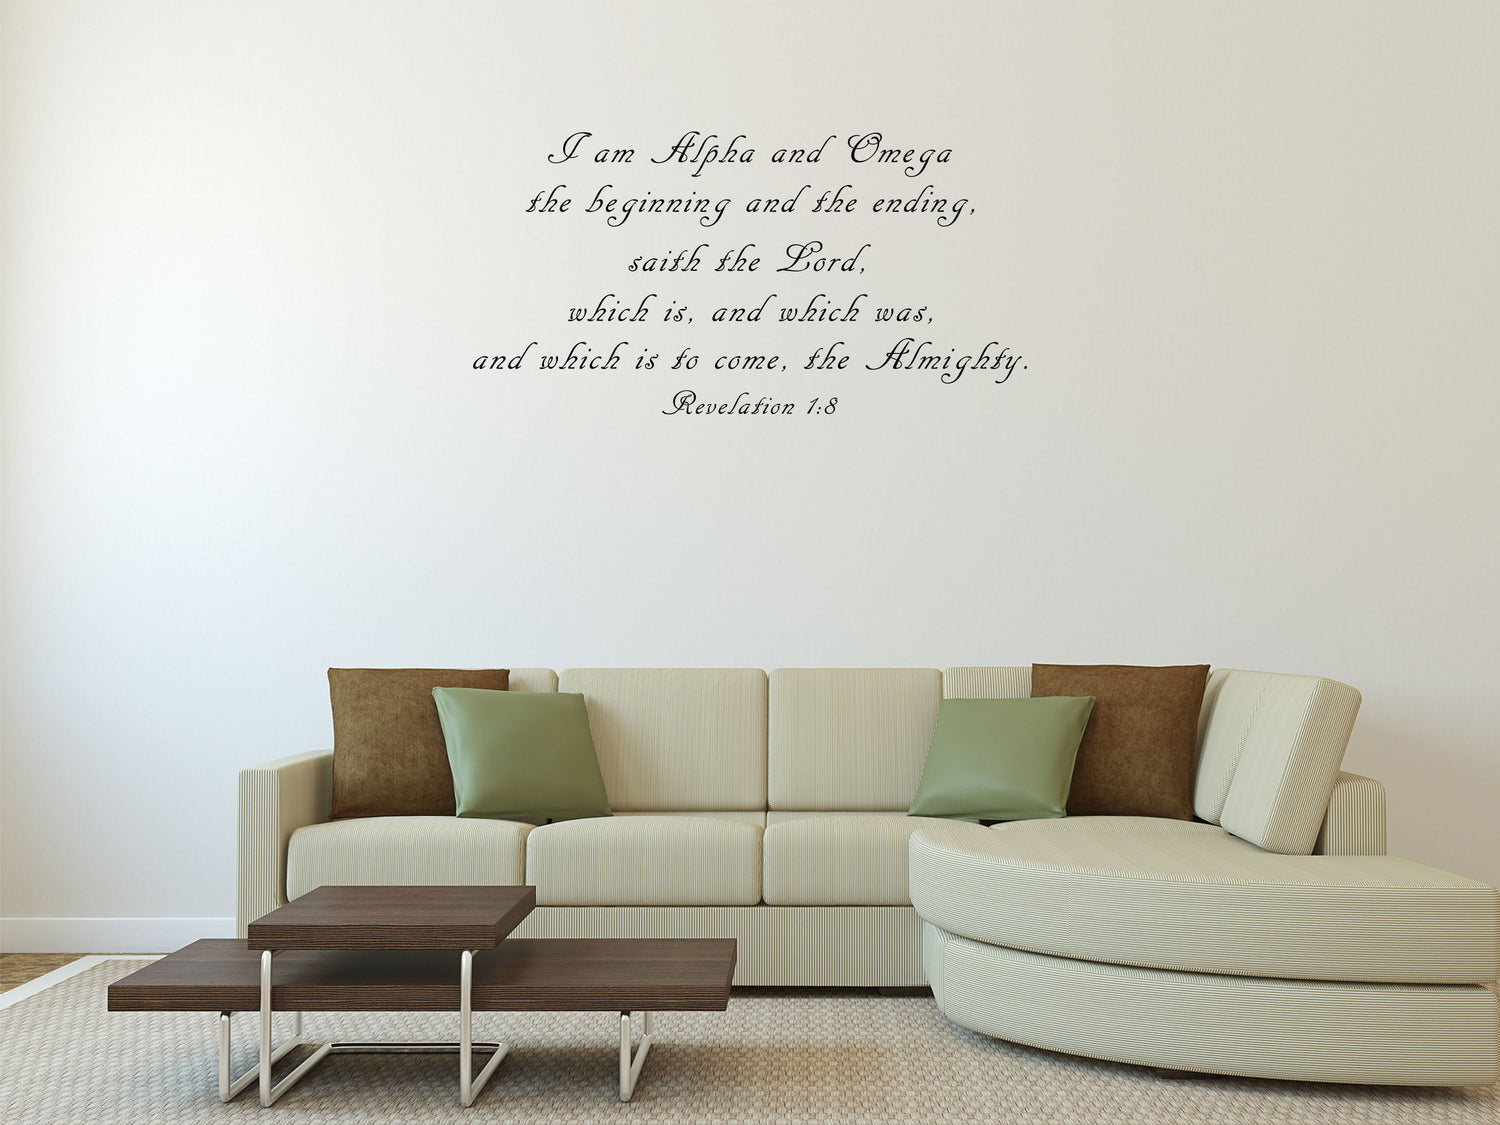 Revelation 1:8 I Am Alpha And Omega - Scripture Wall Decals Vinyl Wall Decal Inspirational Wall Signs 